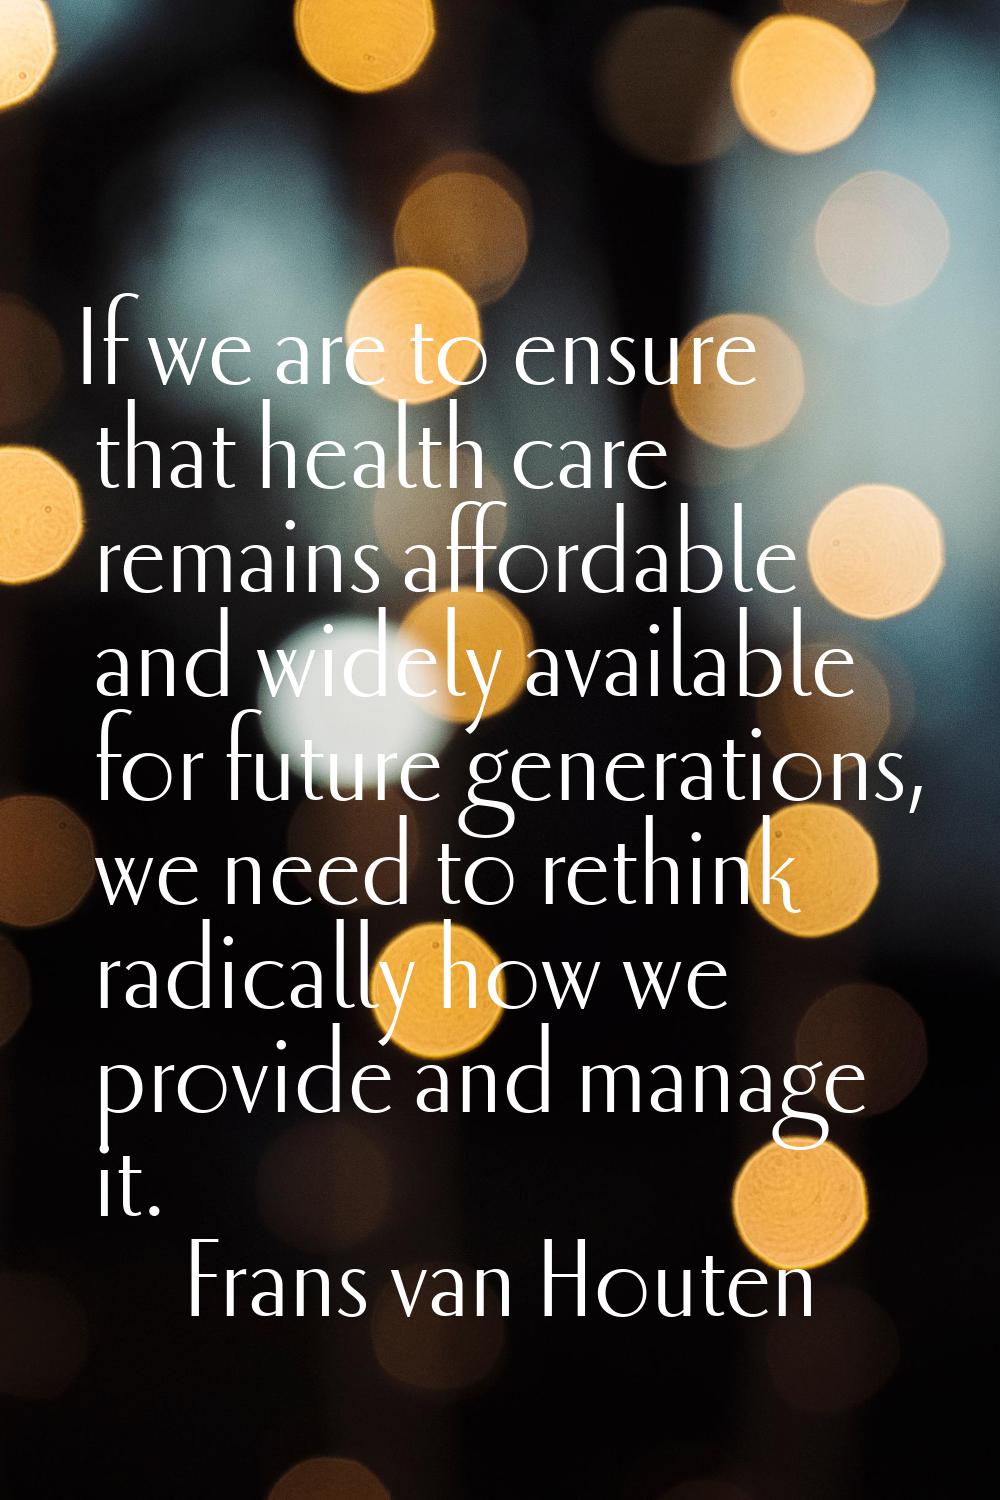 If we are to ensure that health care remains affordable and widely available for future generations